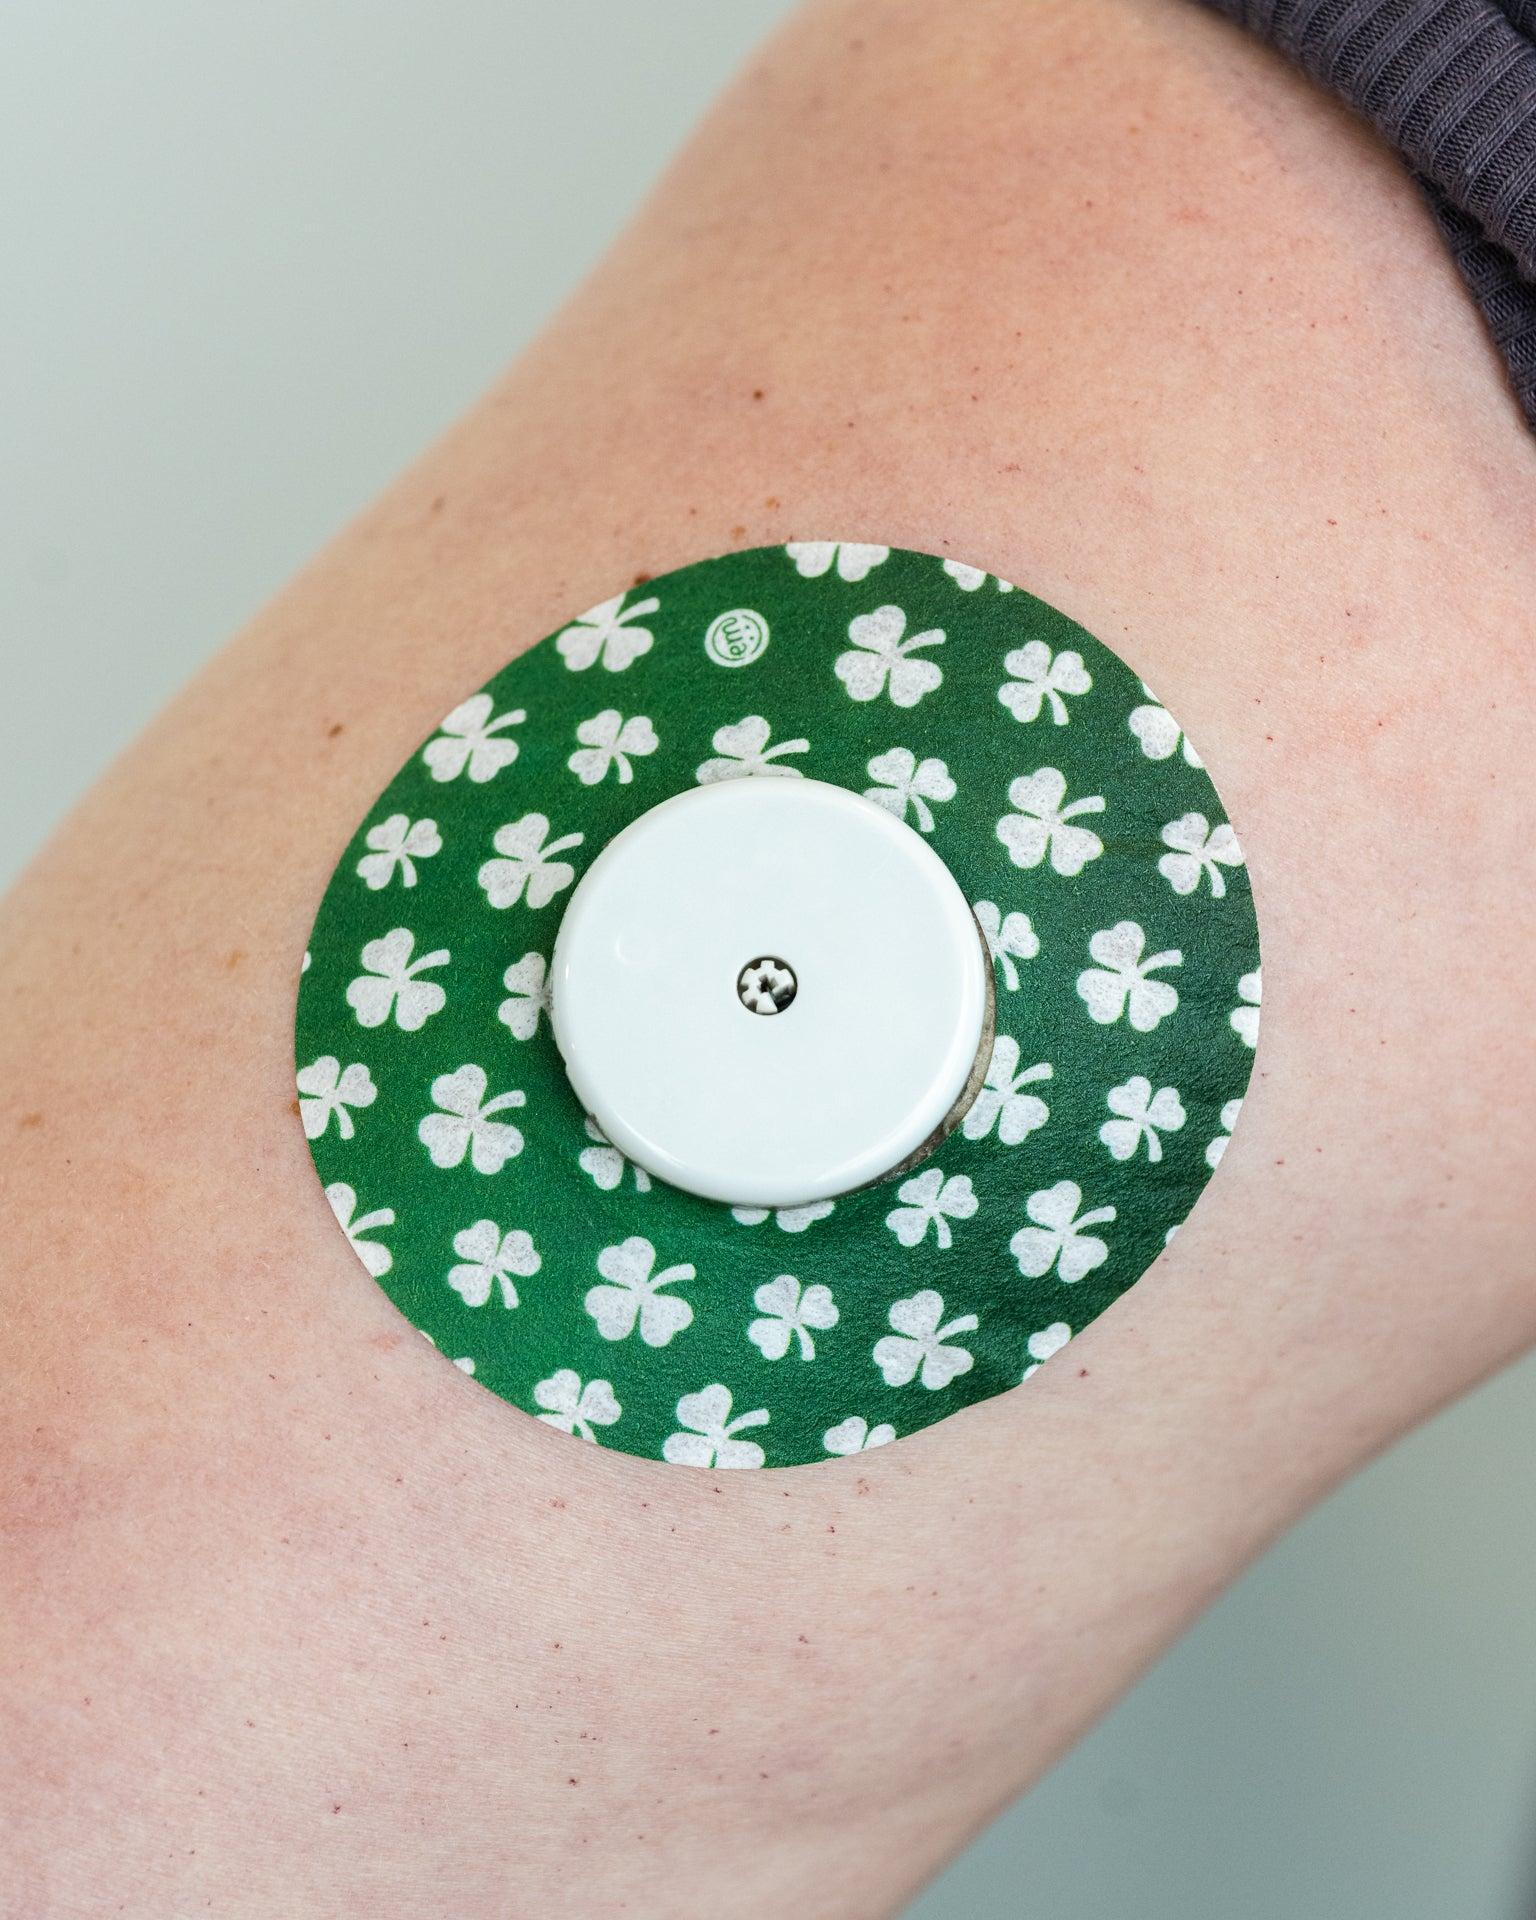 Shamrock Libre Tape shown in use on arm